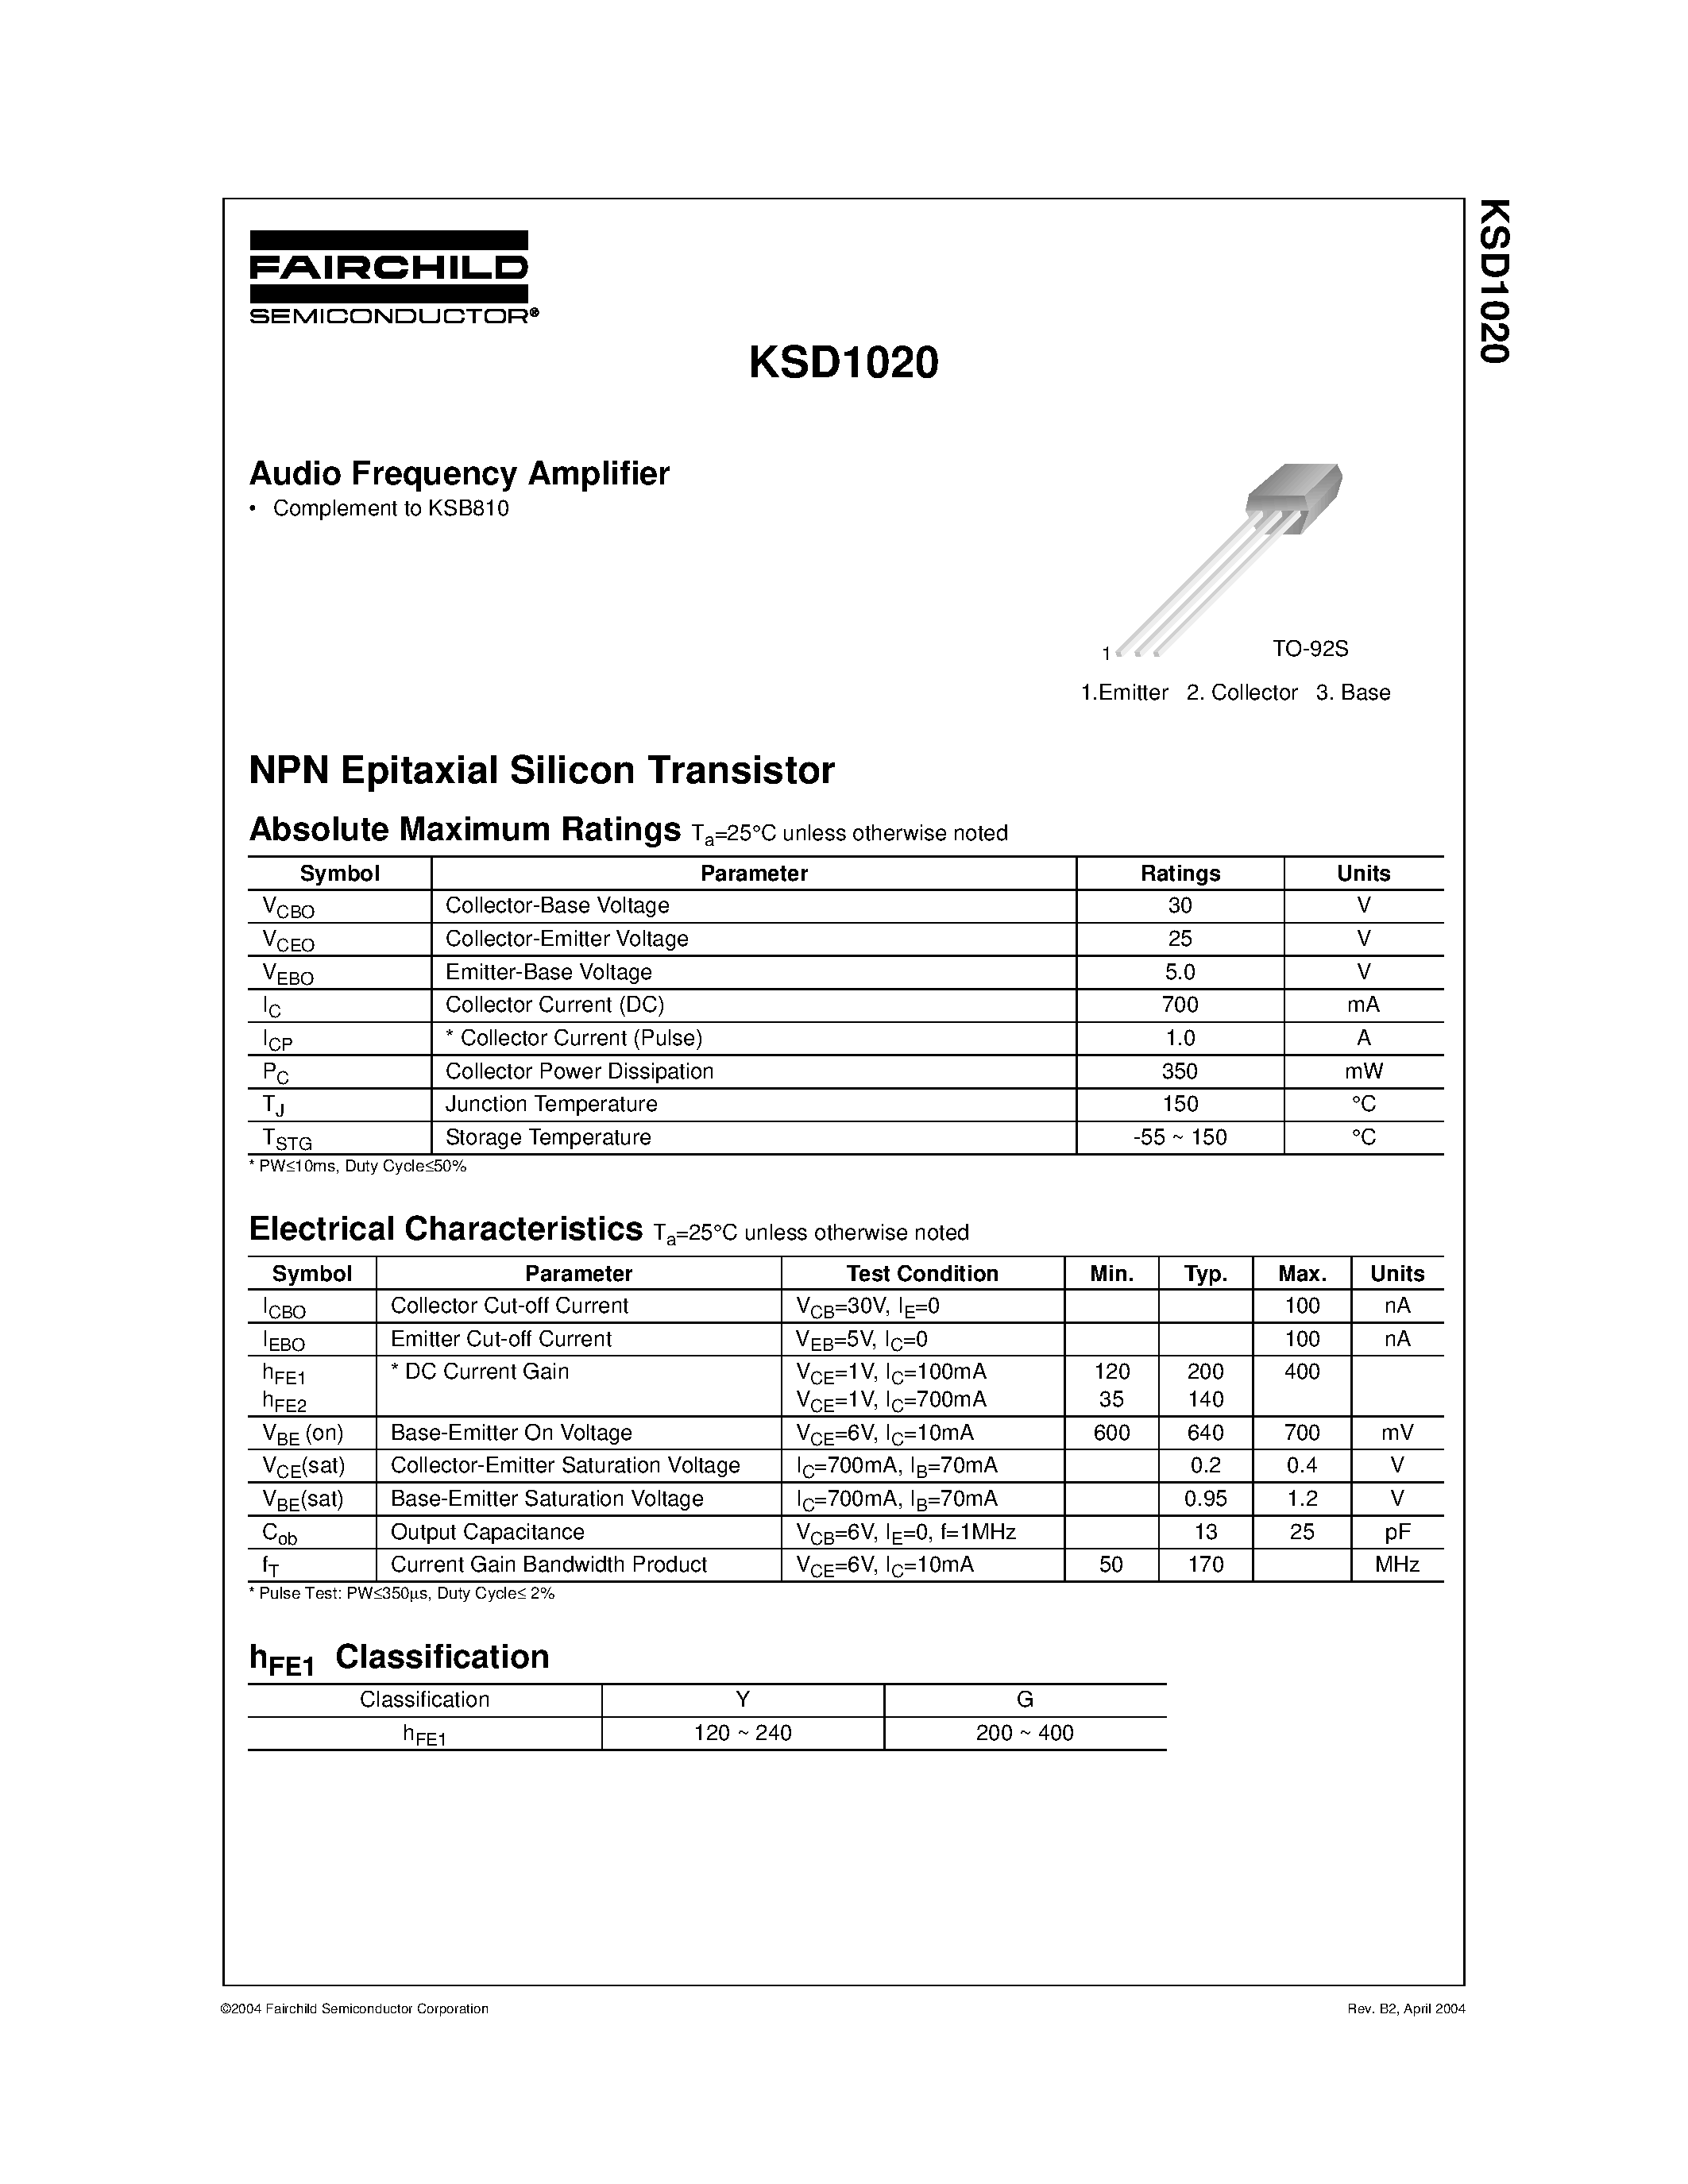 Datasheet KSD1020 - Audio Frequency Amplifier page 1